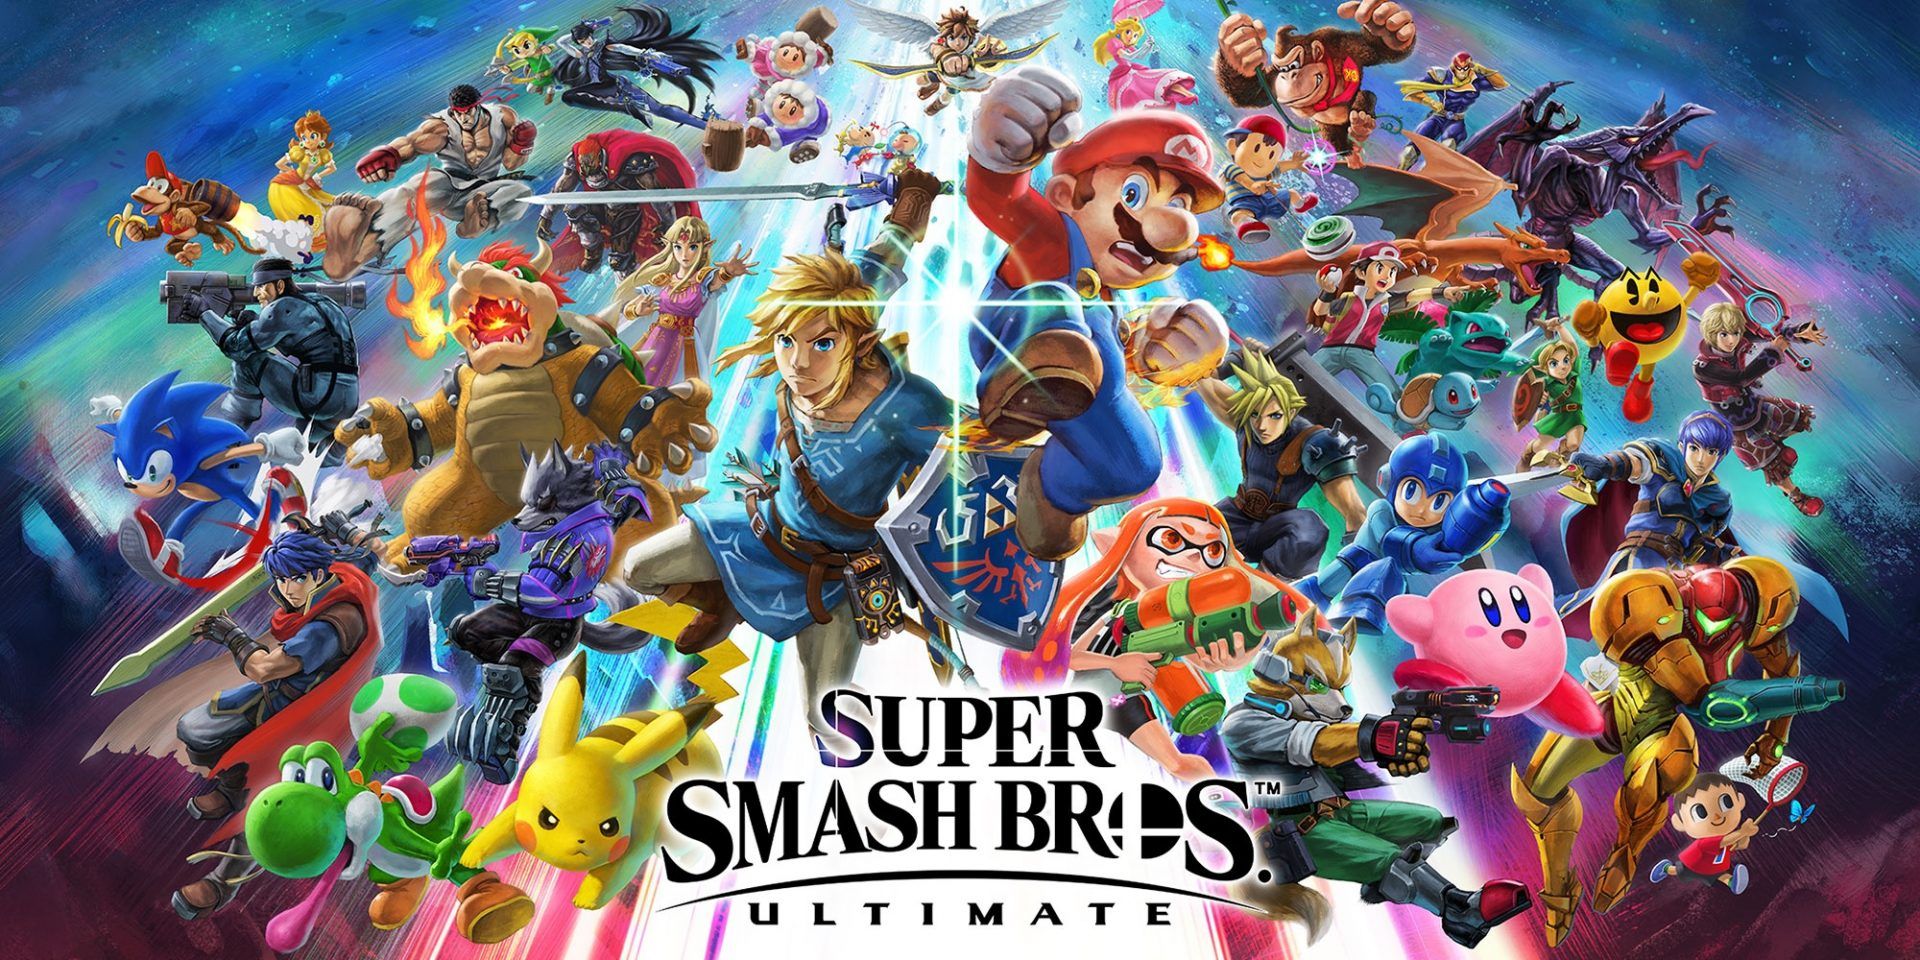 The full version of the official box art for Super Smash Bros. Ultimate, featuring Mario, Link, Inkling and more.